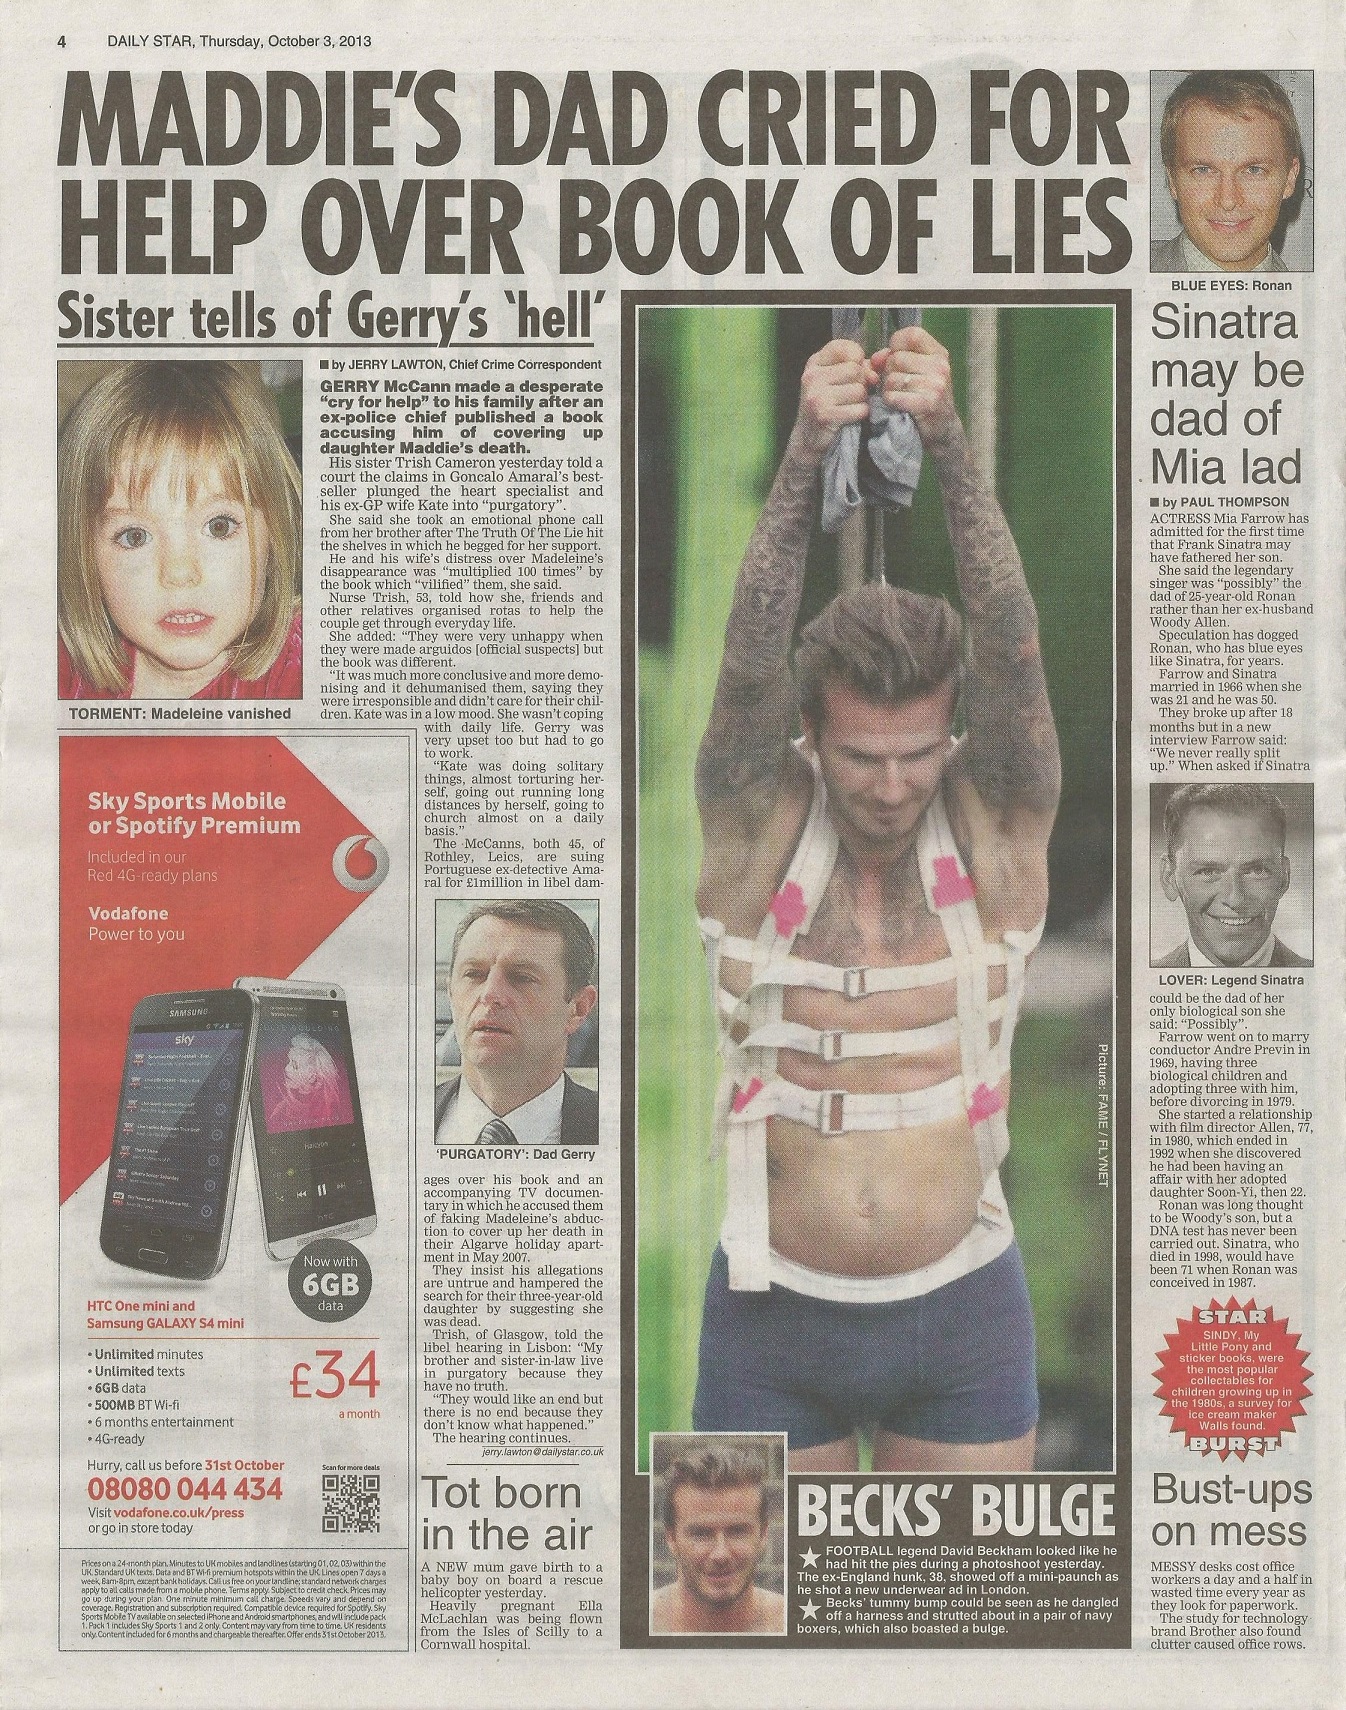 Daily Star, paper edition, page 4: 'MADDIE'S DAD CRIED FOR HELP OVER BOOK OF LIES', 03 October 2013